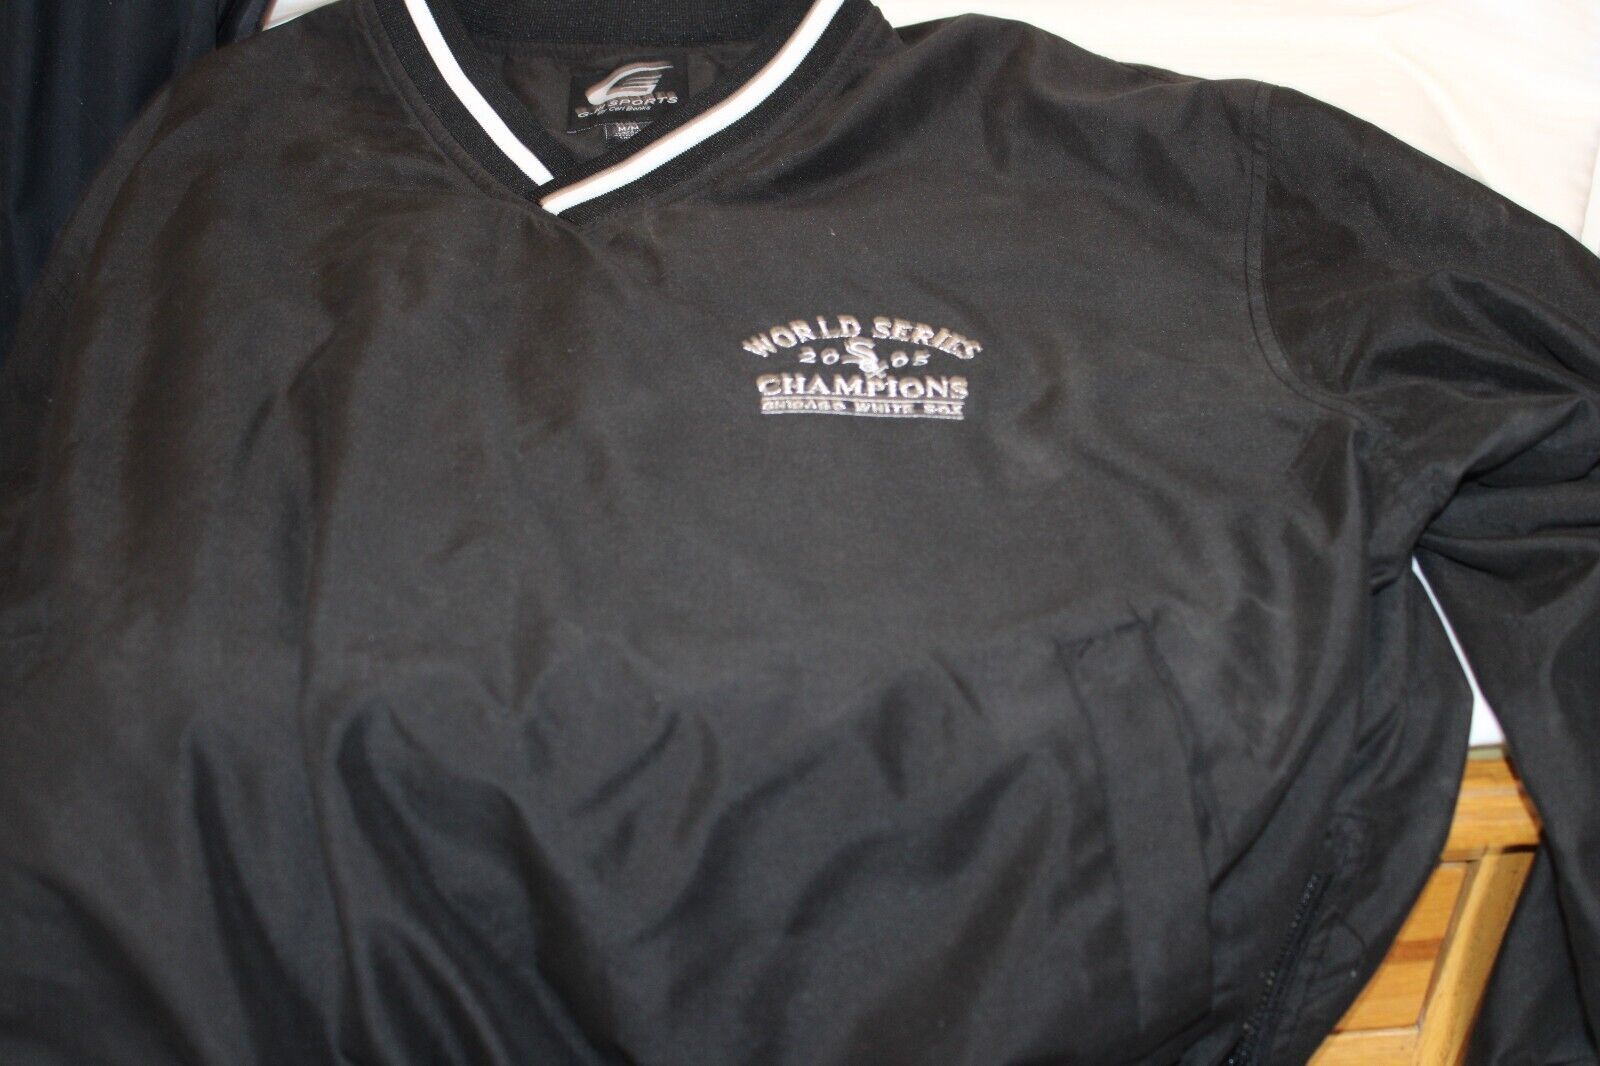 2005 Chicago White Sox 1/4 Zip Pullover Top, World Series Champions Size Medium - $60.00